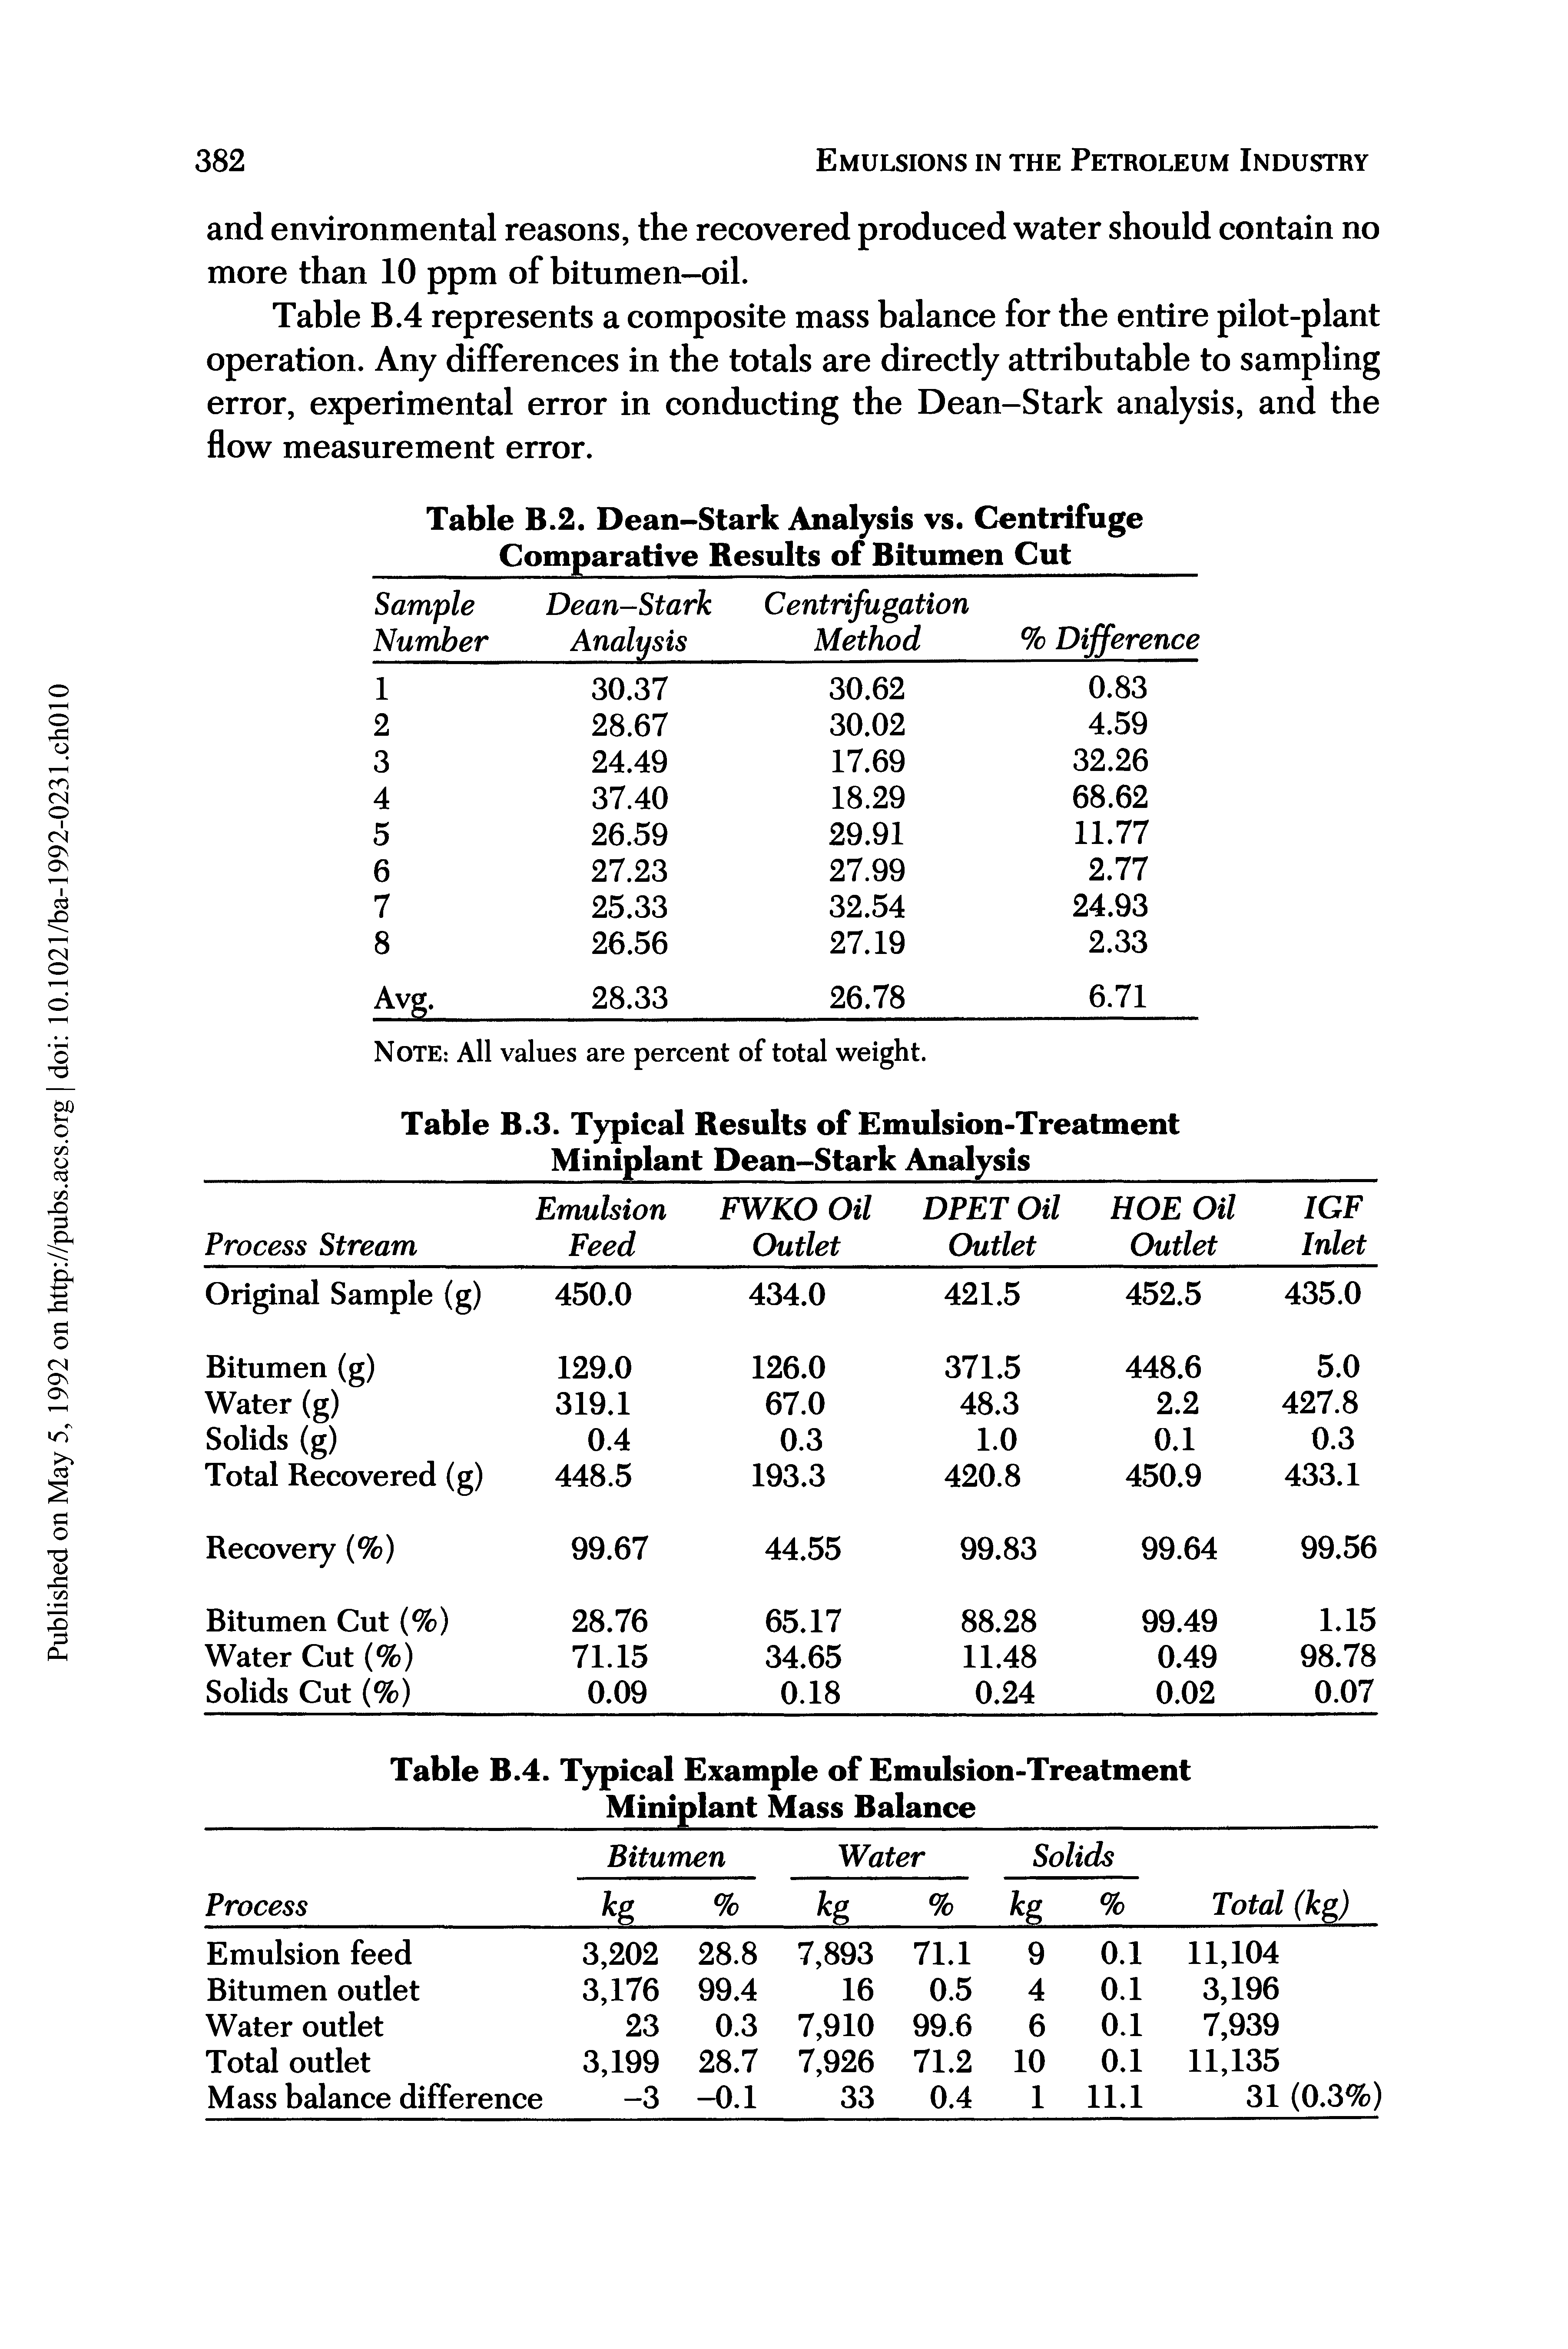 Table B.4 represents a composite mass balance for the entire pilot-plant operation. Any differences in the totals are directly attributable to sampling error, experimental error in conducting the Dean-Stark analysis, and the flow measurement error.